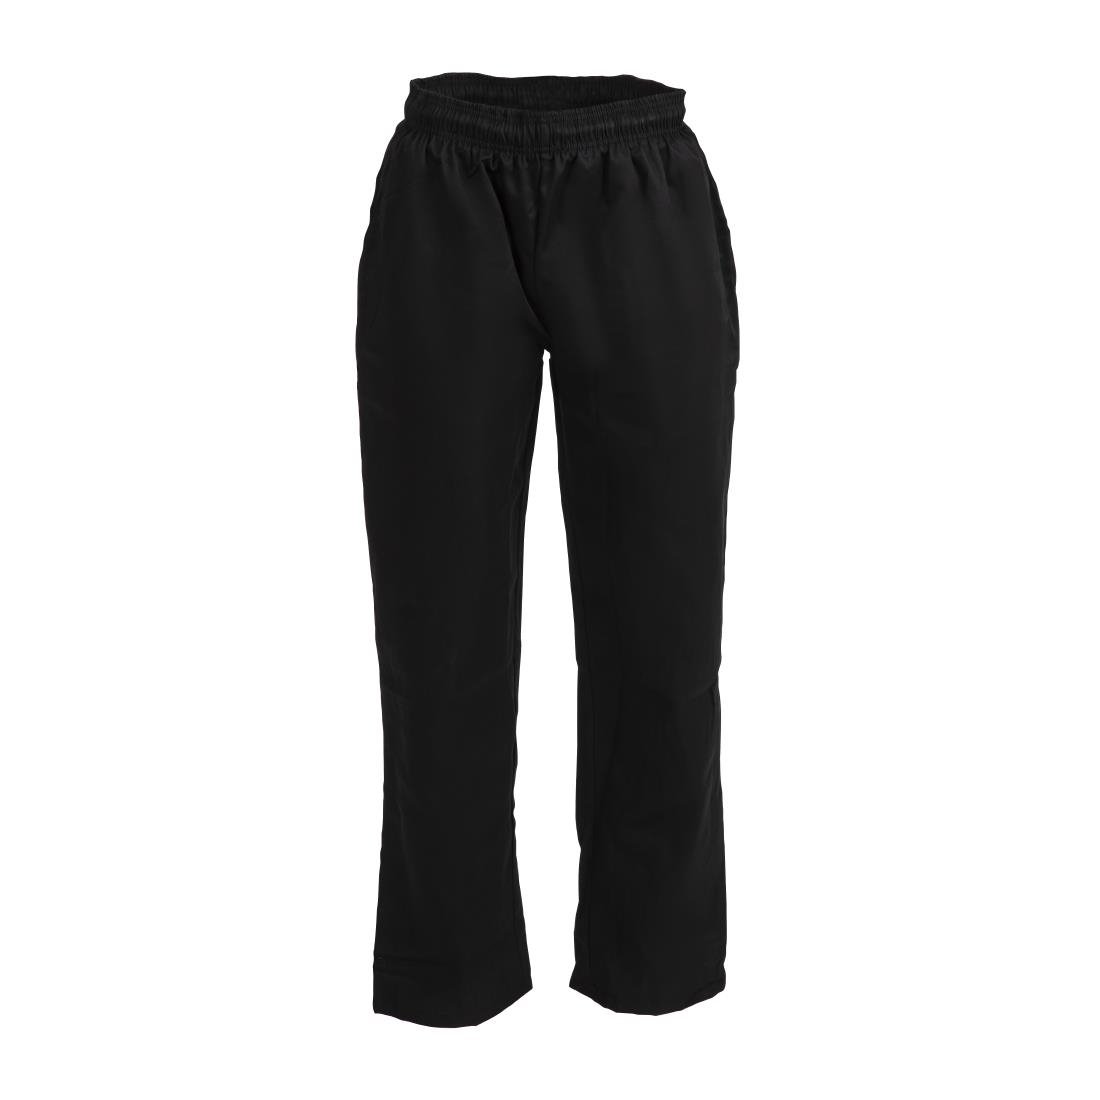 A582-XL Whites Vegas Chef Trousers Polycotton Black XL JD Catering Equipment Solutions Ltd